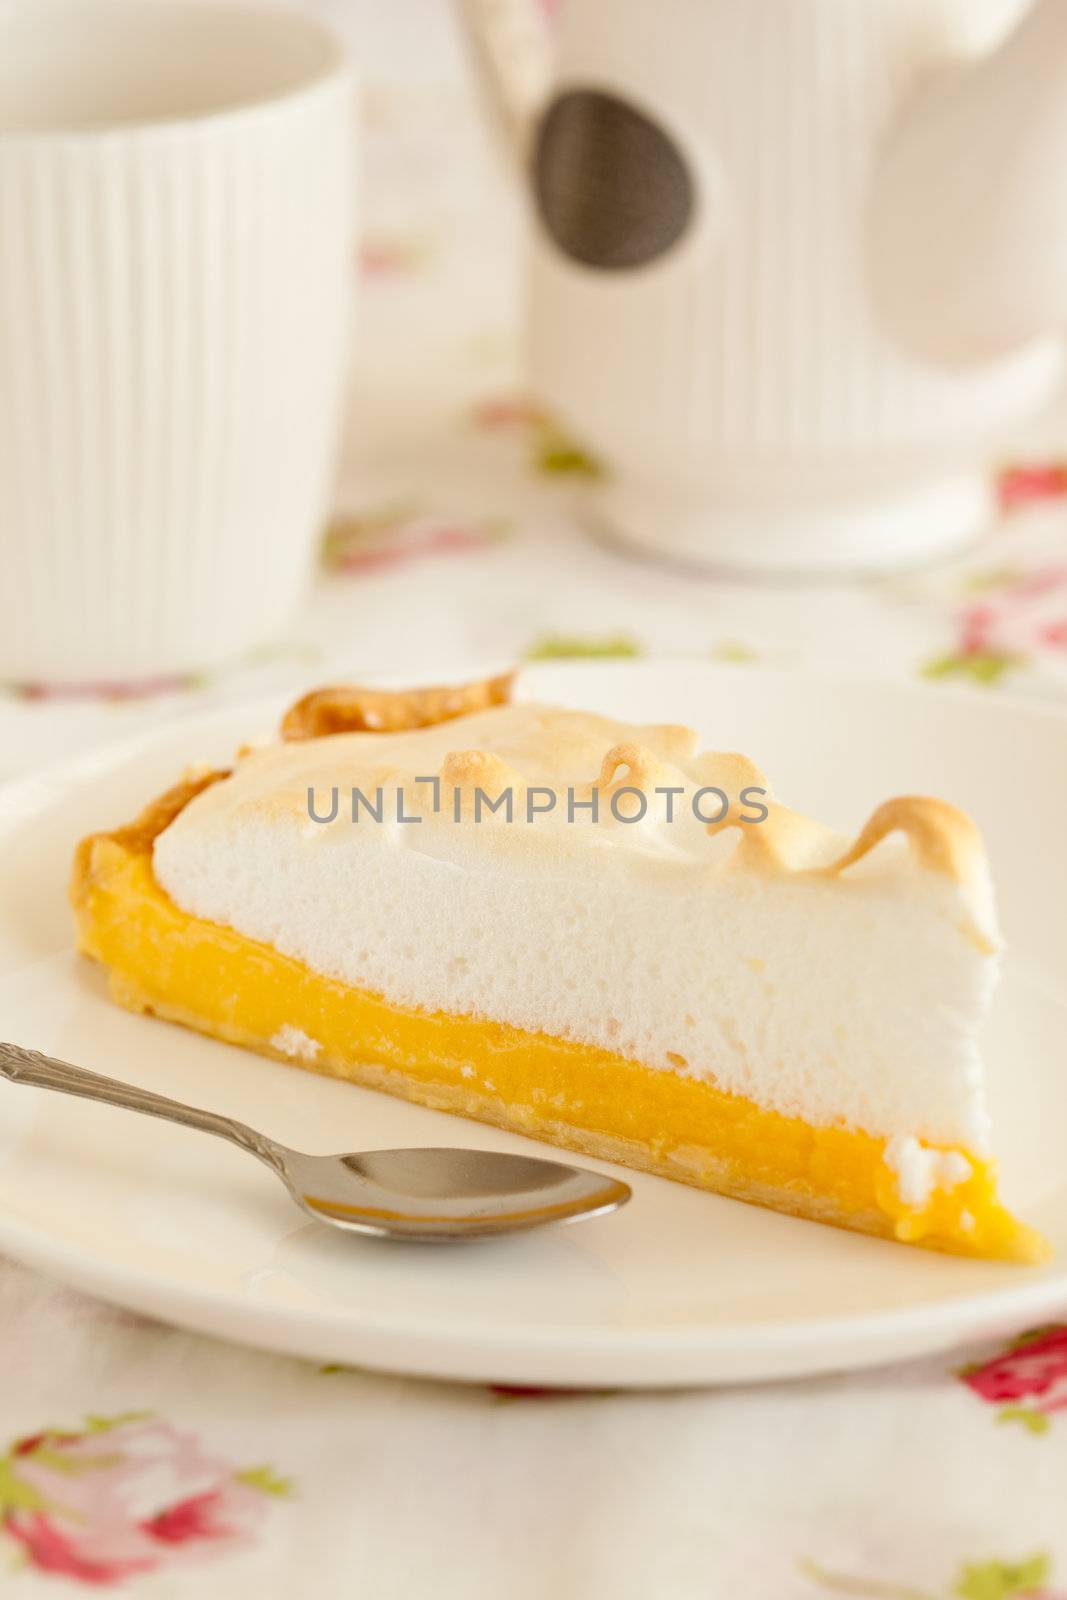 Delicious and sweet lemon meringue pie on a plate